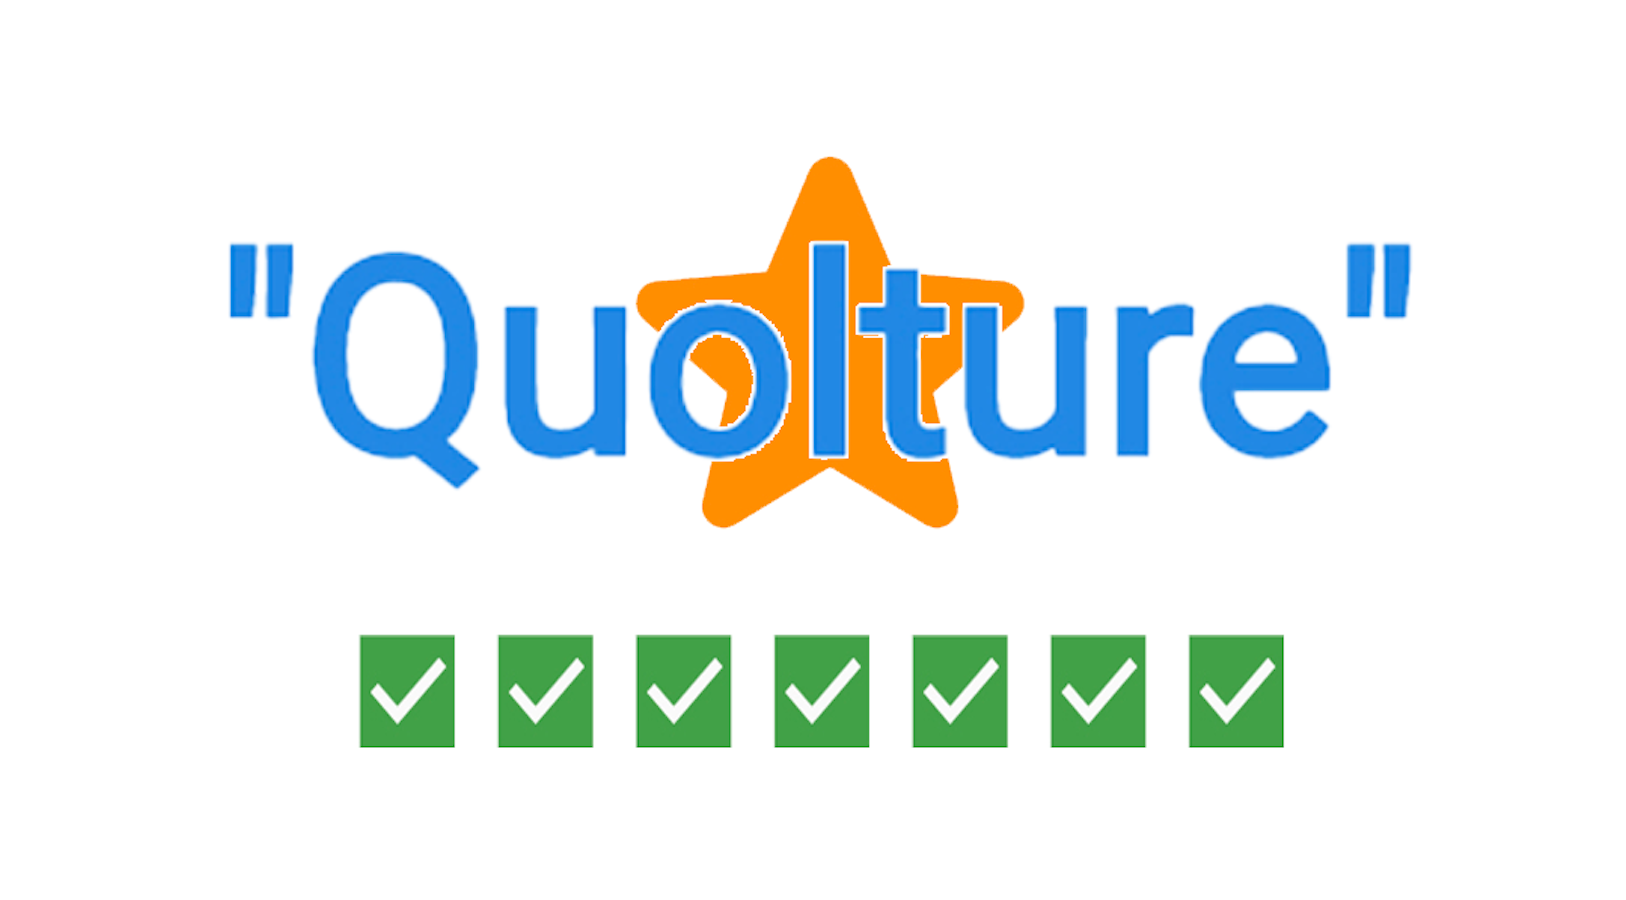 Quolture today answers movie tv